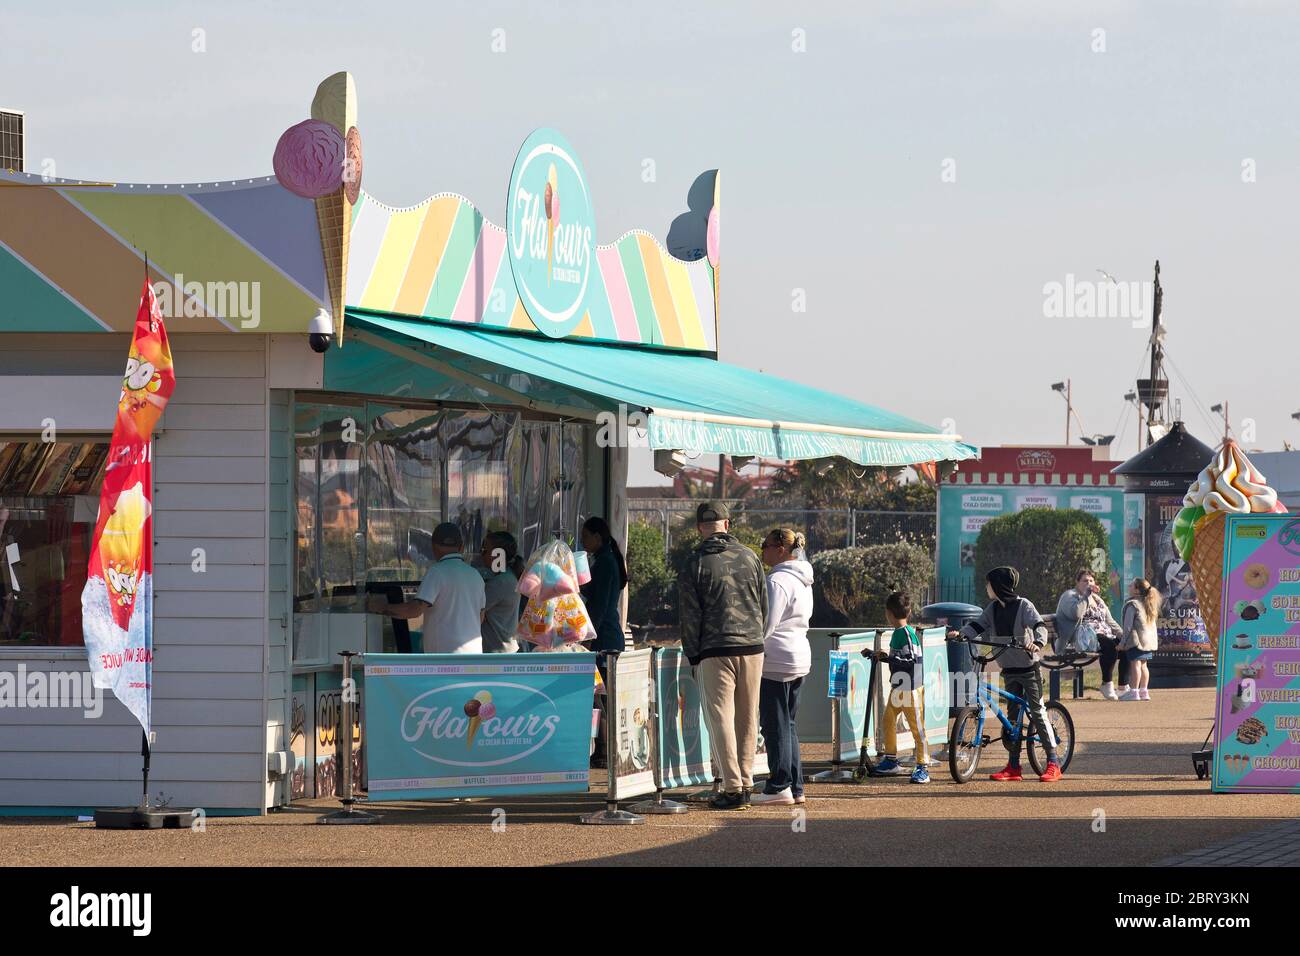 20th May 2020. Great Yarmouth, UK. As restrictions ease some seasonal traders like Flavours Ice Cream & Coffee Bar in Great Yarmouth see a gradual return of business as more local people visit the resort's golden mile. Stock Photo